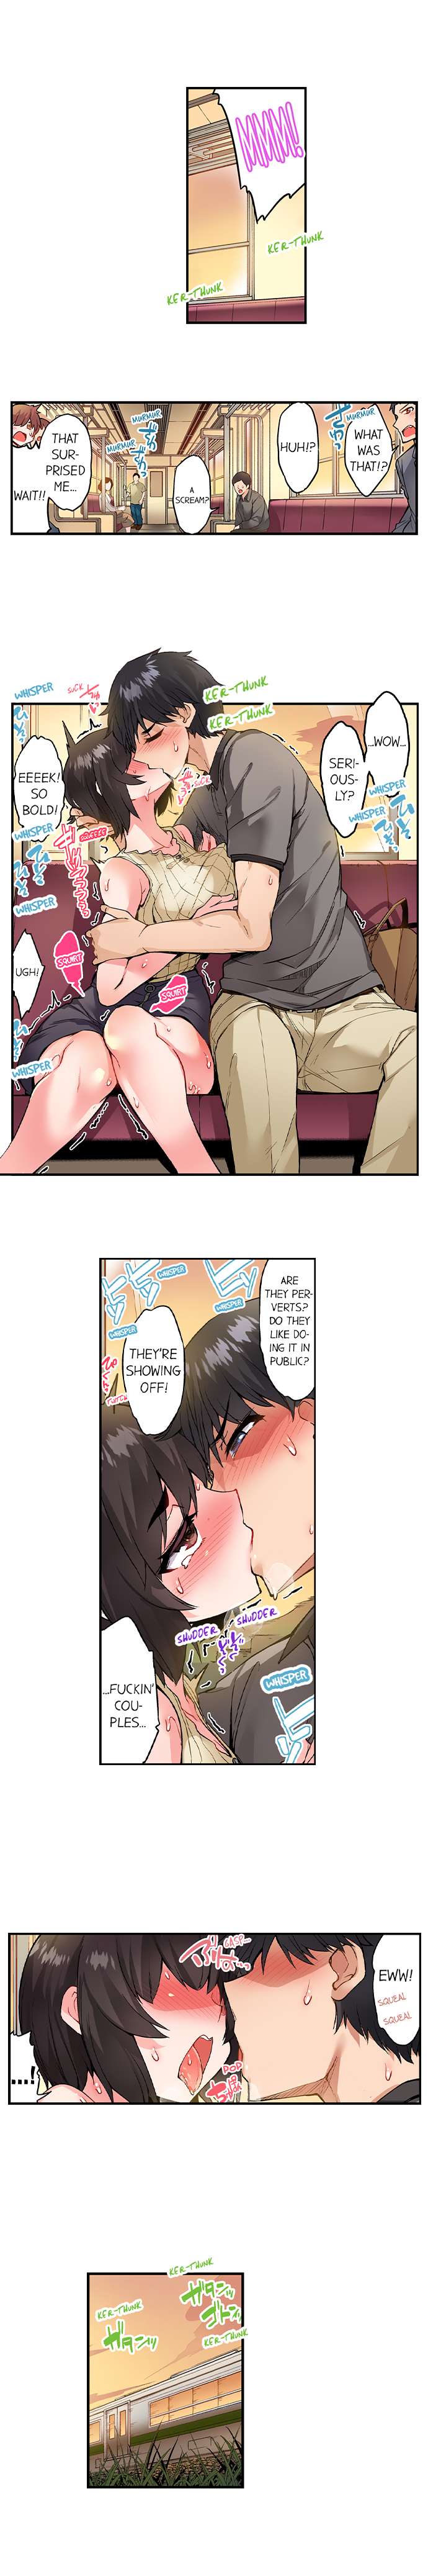 Traditional Job of Washing Girls’ Body - Chapter 144 Page 8